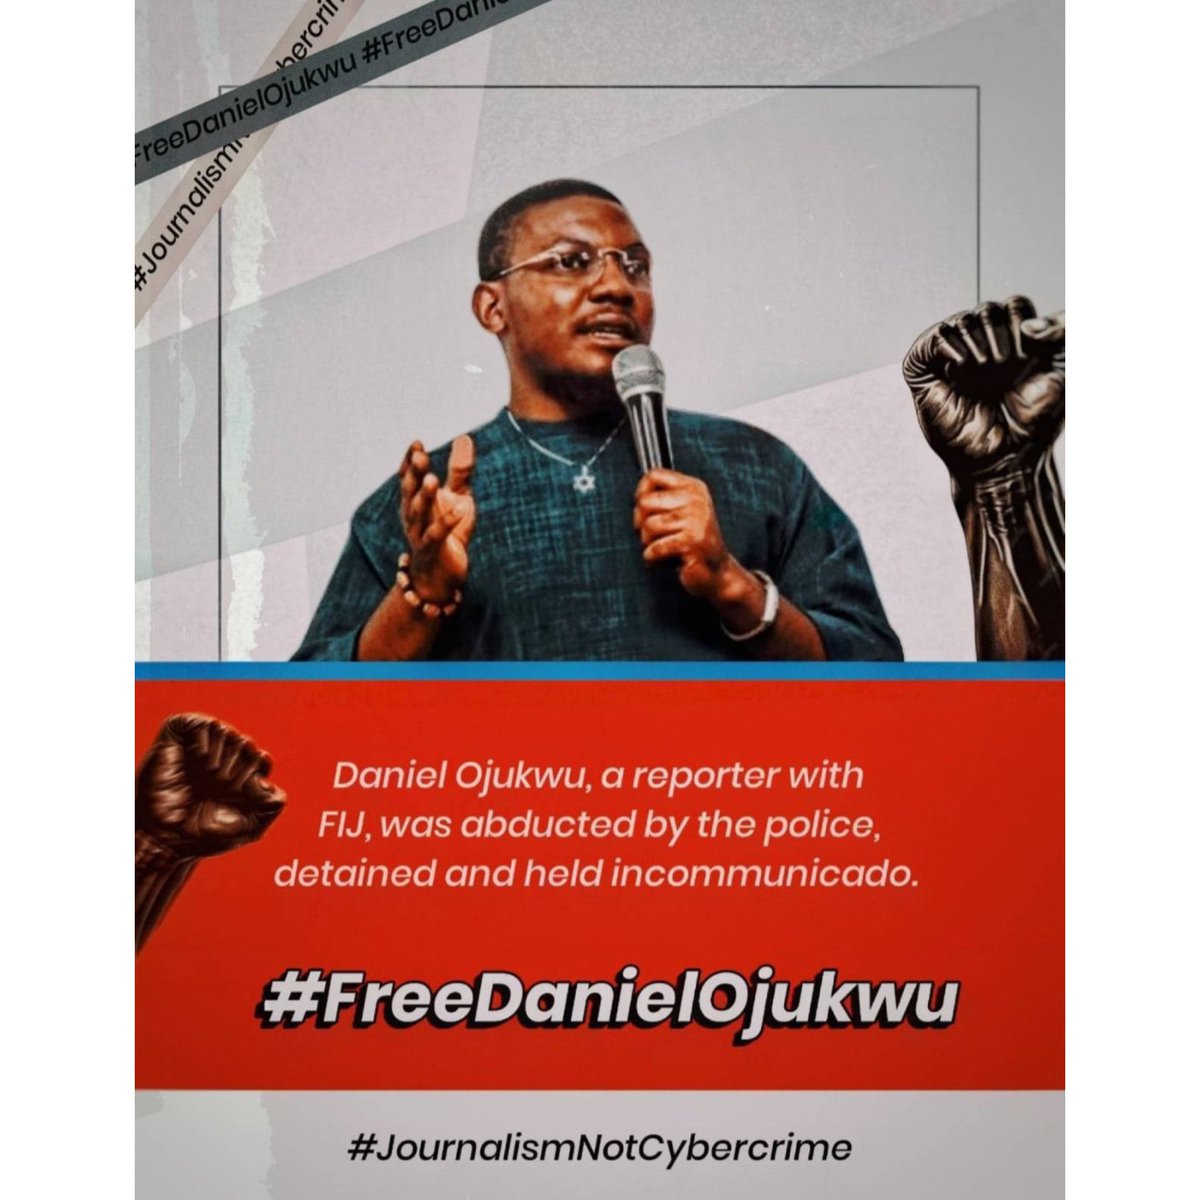 I woke up with a heavy heart today again. It's been one week & one day since Daniel's unjust detention. A journalist, not a criminal, he must be freed. Join us in demanding his release by using #FreeDanielOjukwu. Let's raise our voices and retweet to amplify the call for justice.